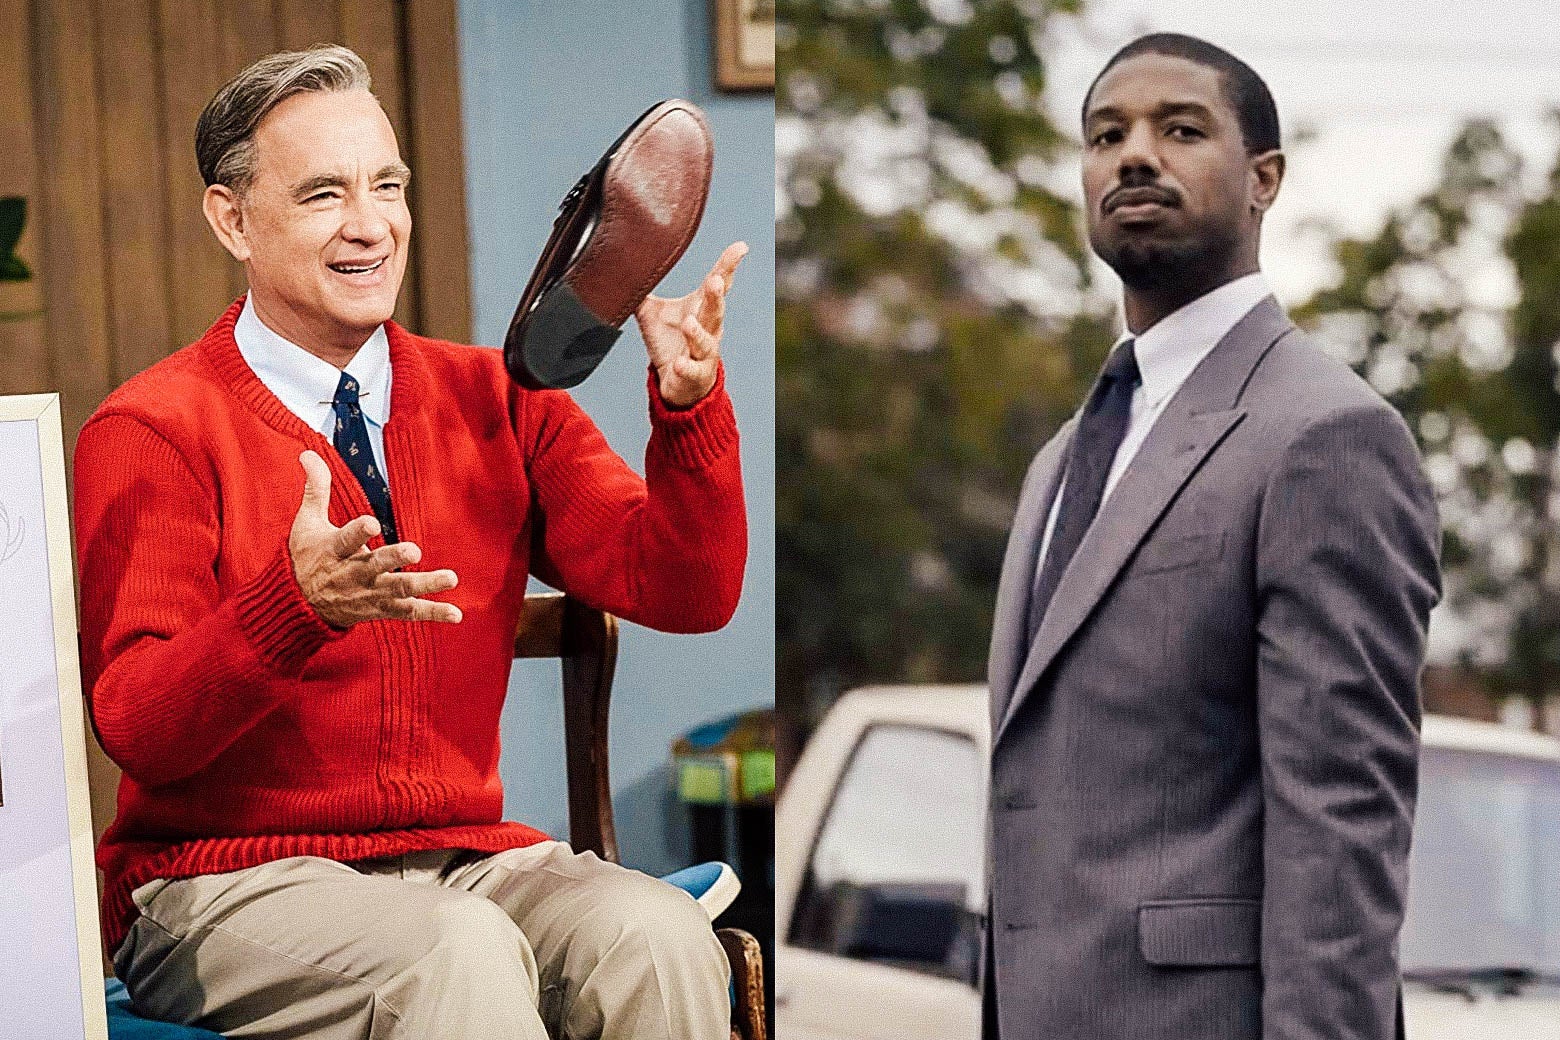 Tom Hanks in A Beautiful Day in the Neighborhood and Michael B. Jordan in Just Mercy.